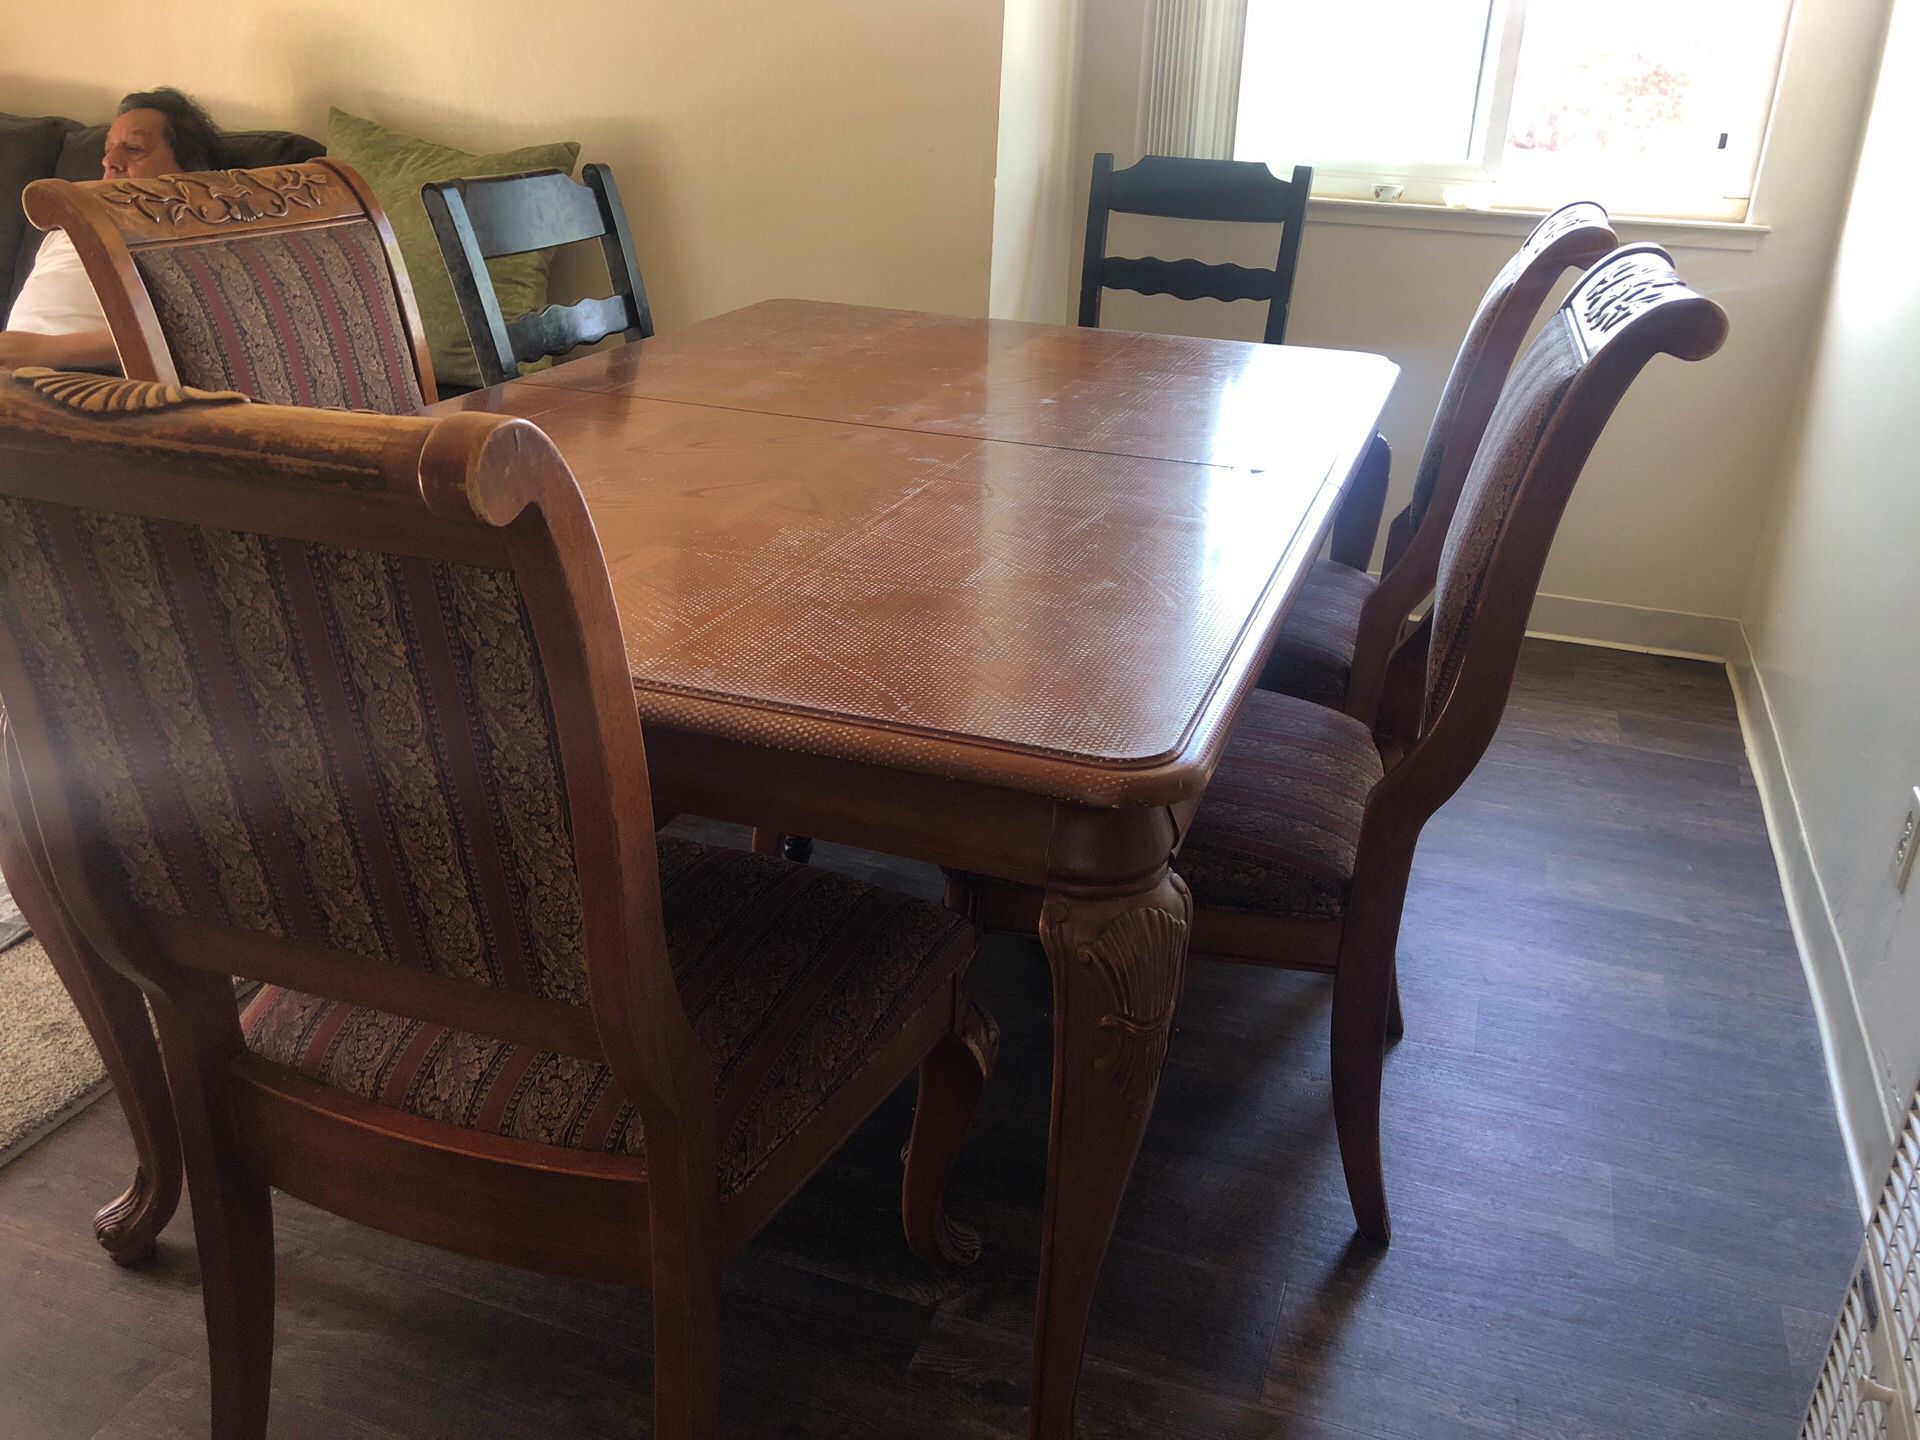 Kitchen table + 4 chairs